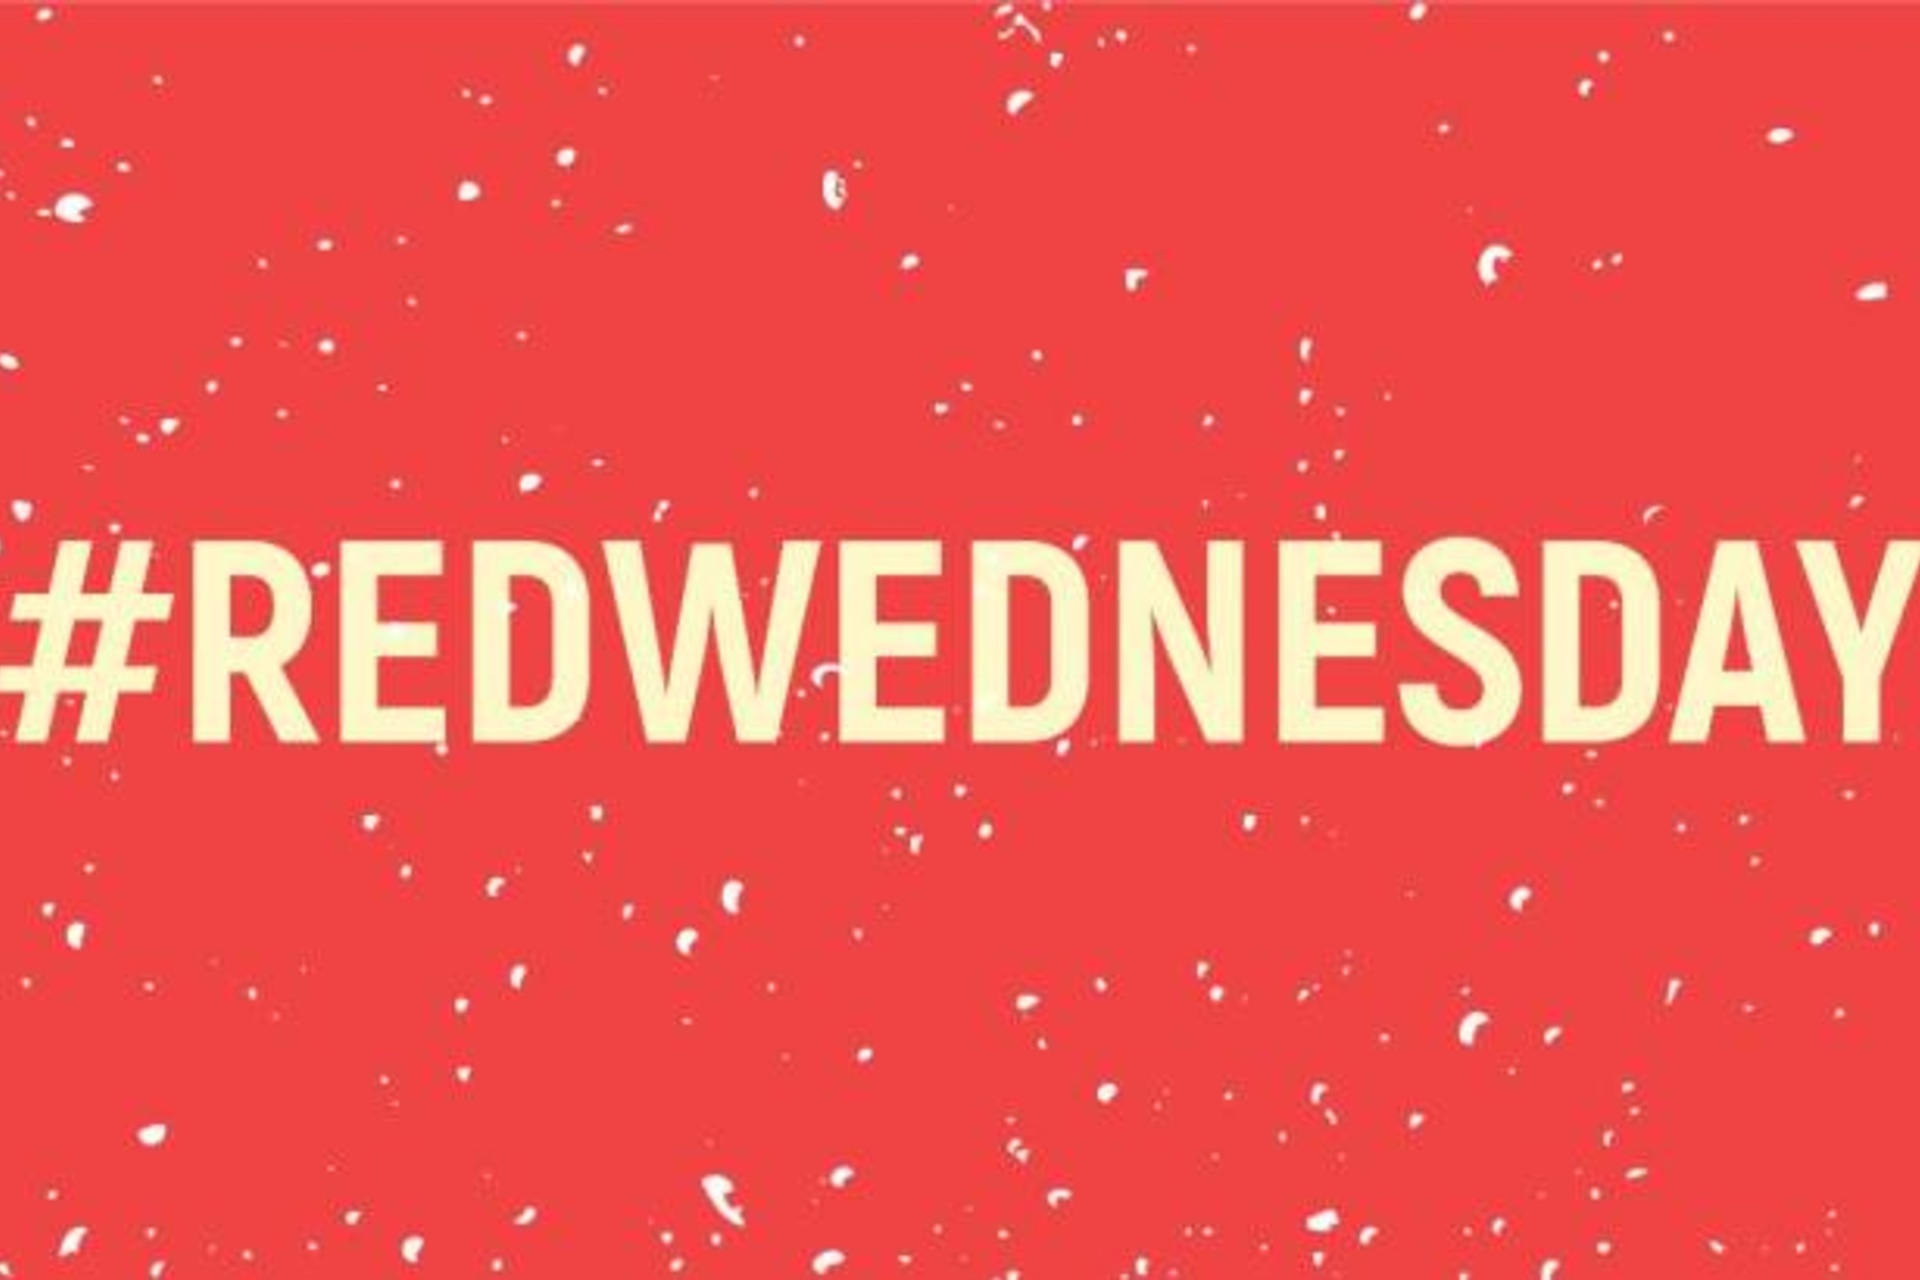 27th of November is #REDWEDNESDAY 